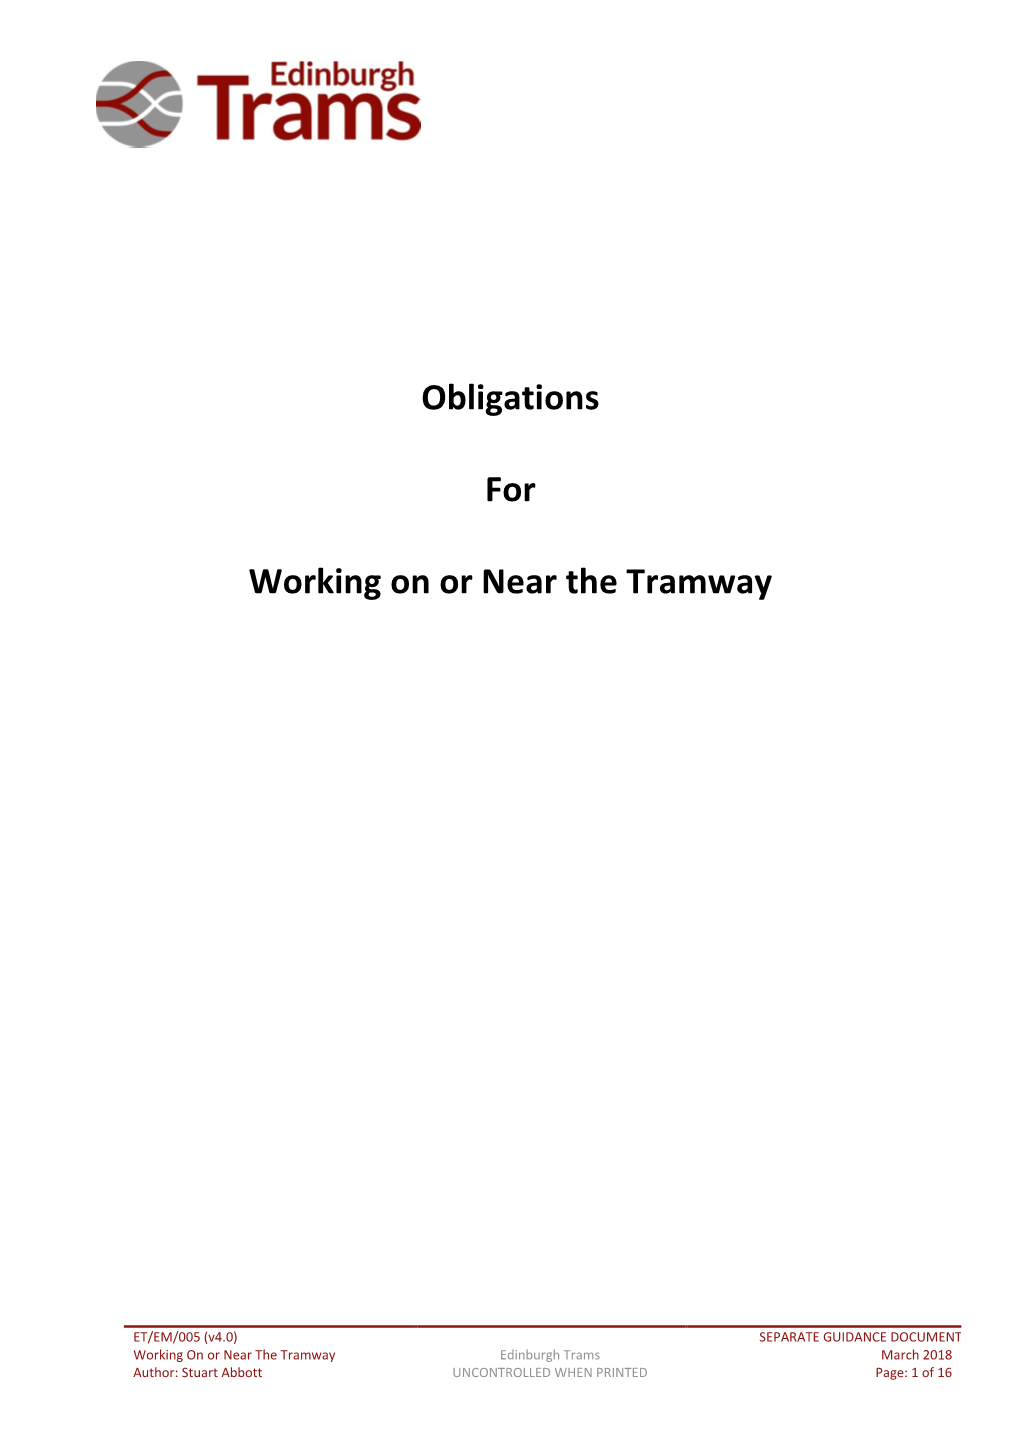 Obligations for Working on Or Near the Tramway